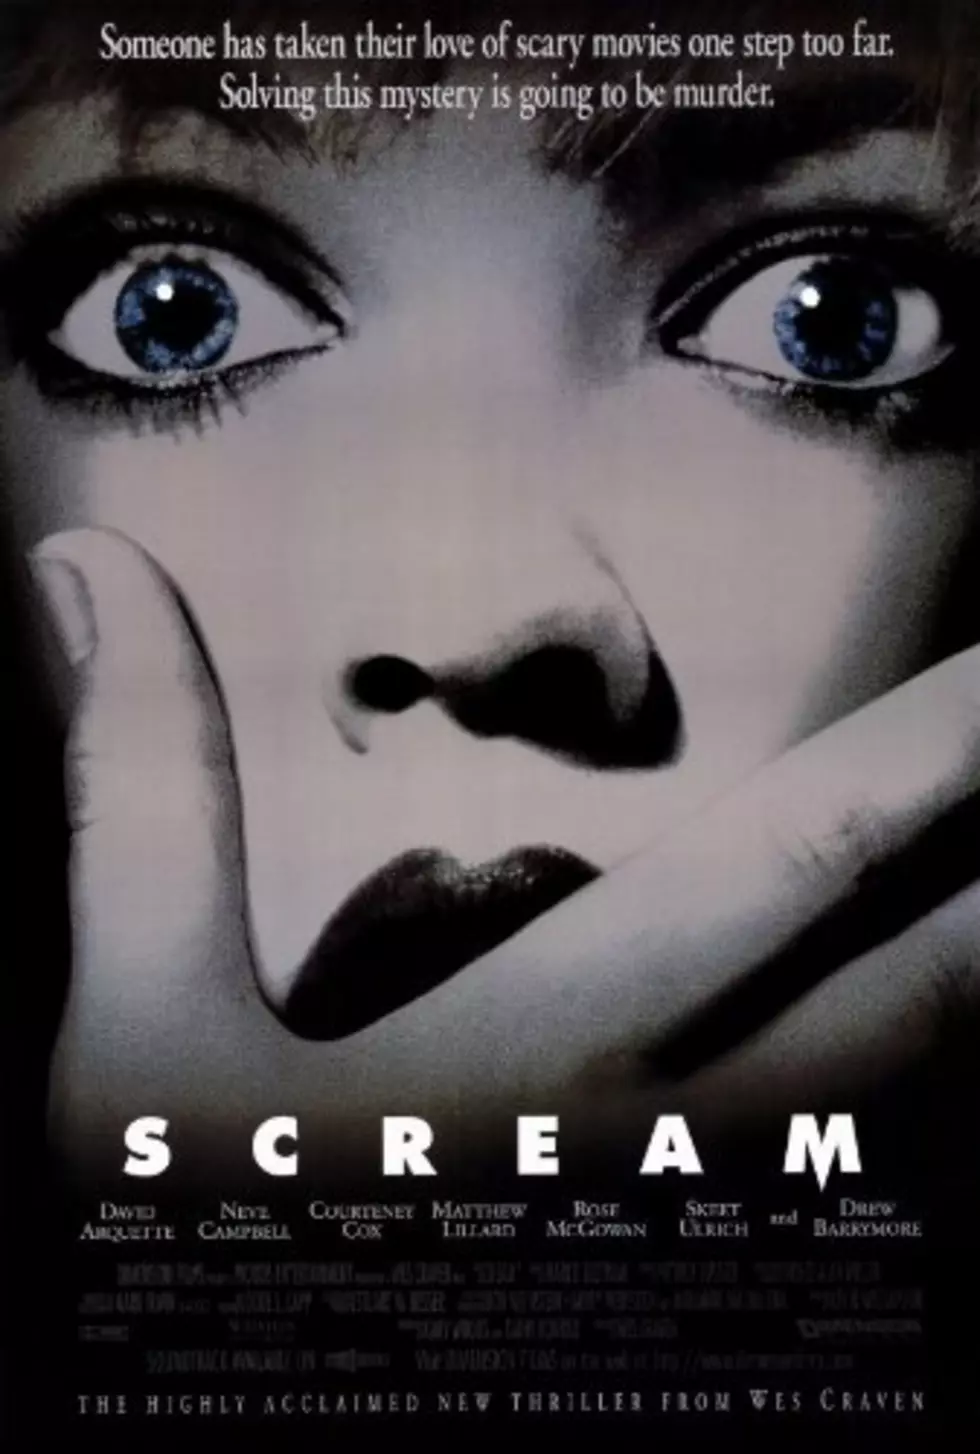 What Better Way To Party On Halloween Than At The “Scream” House?